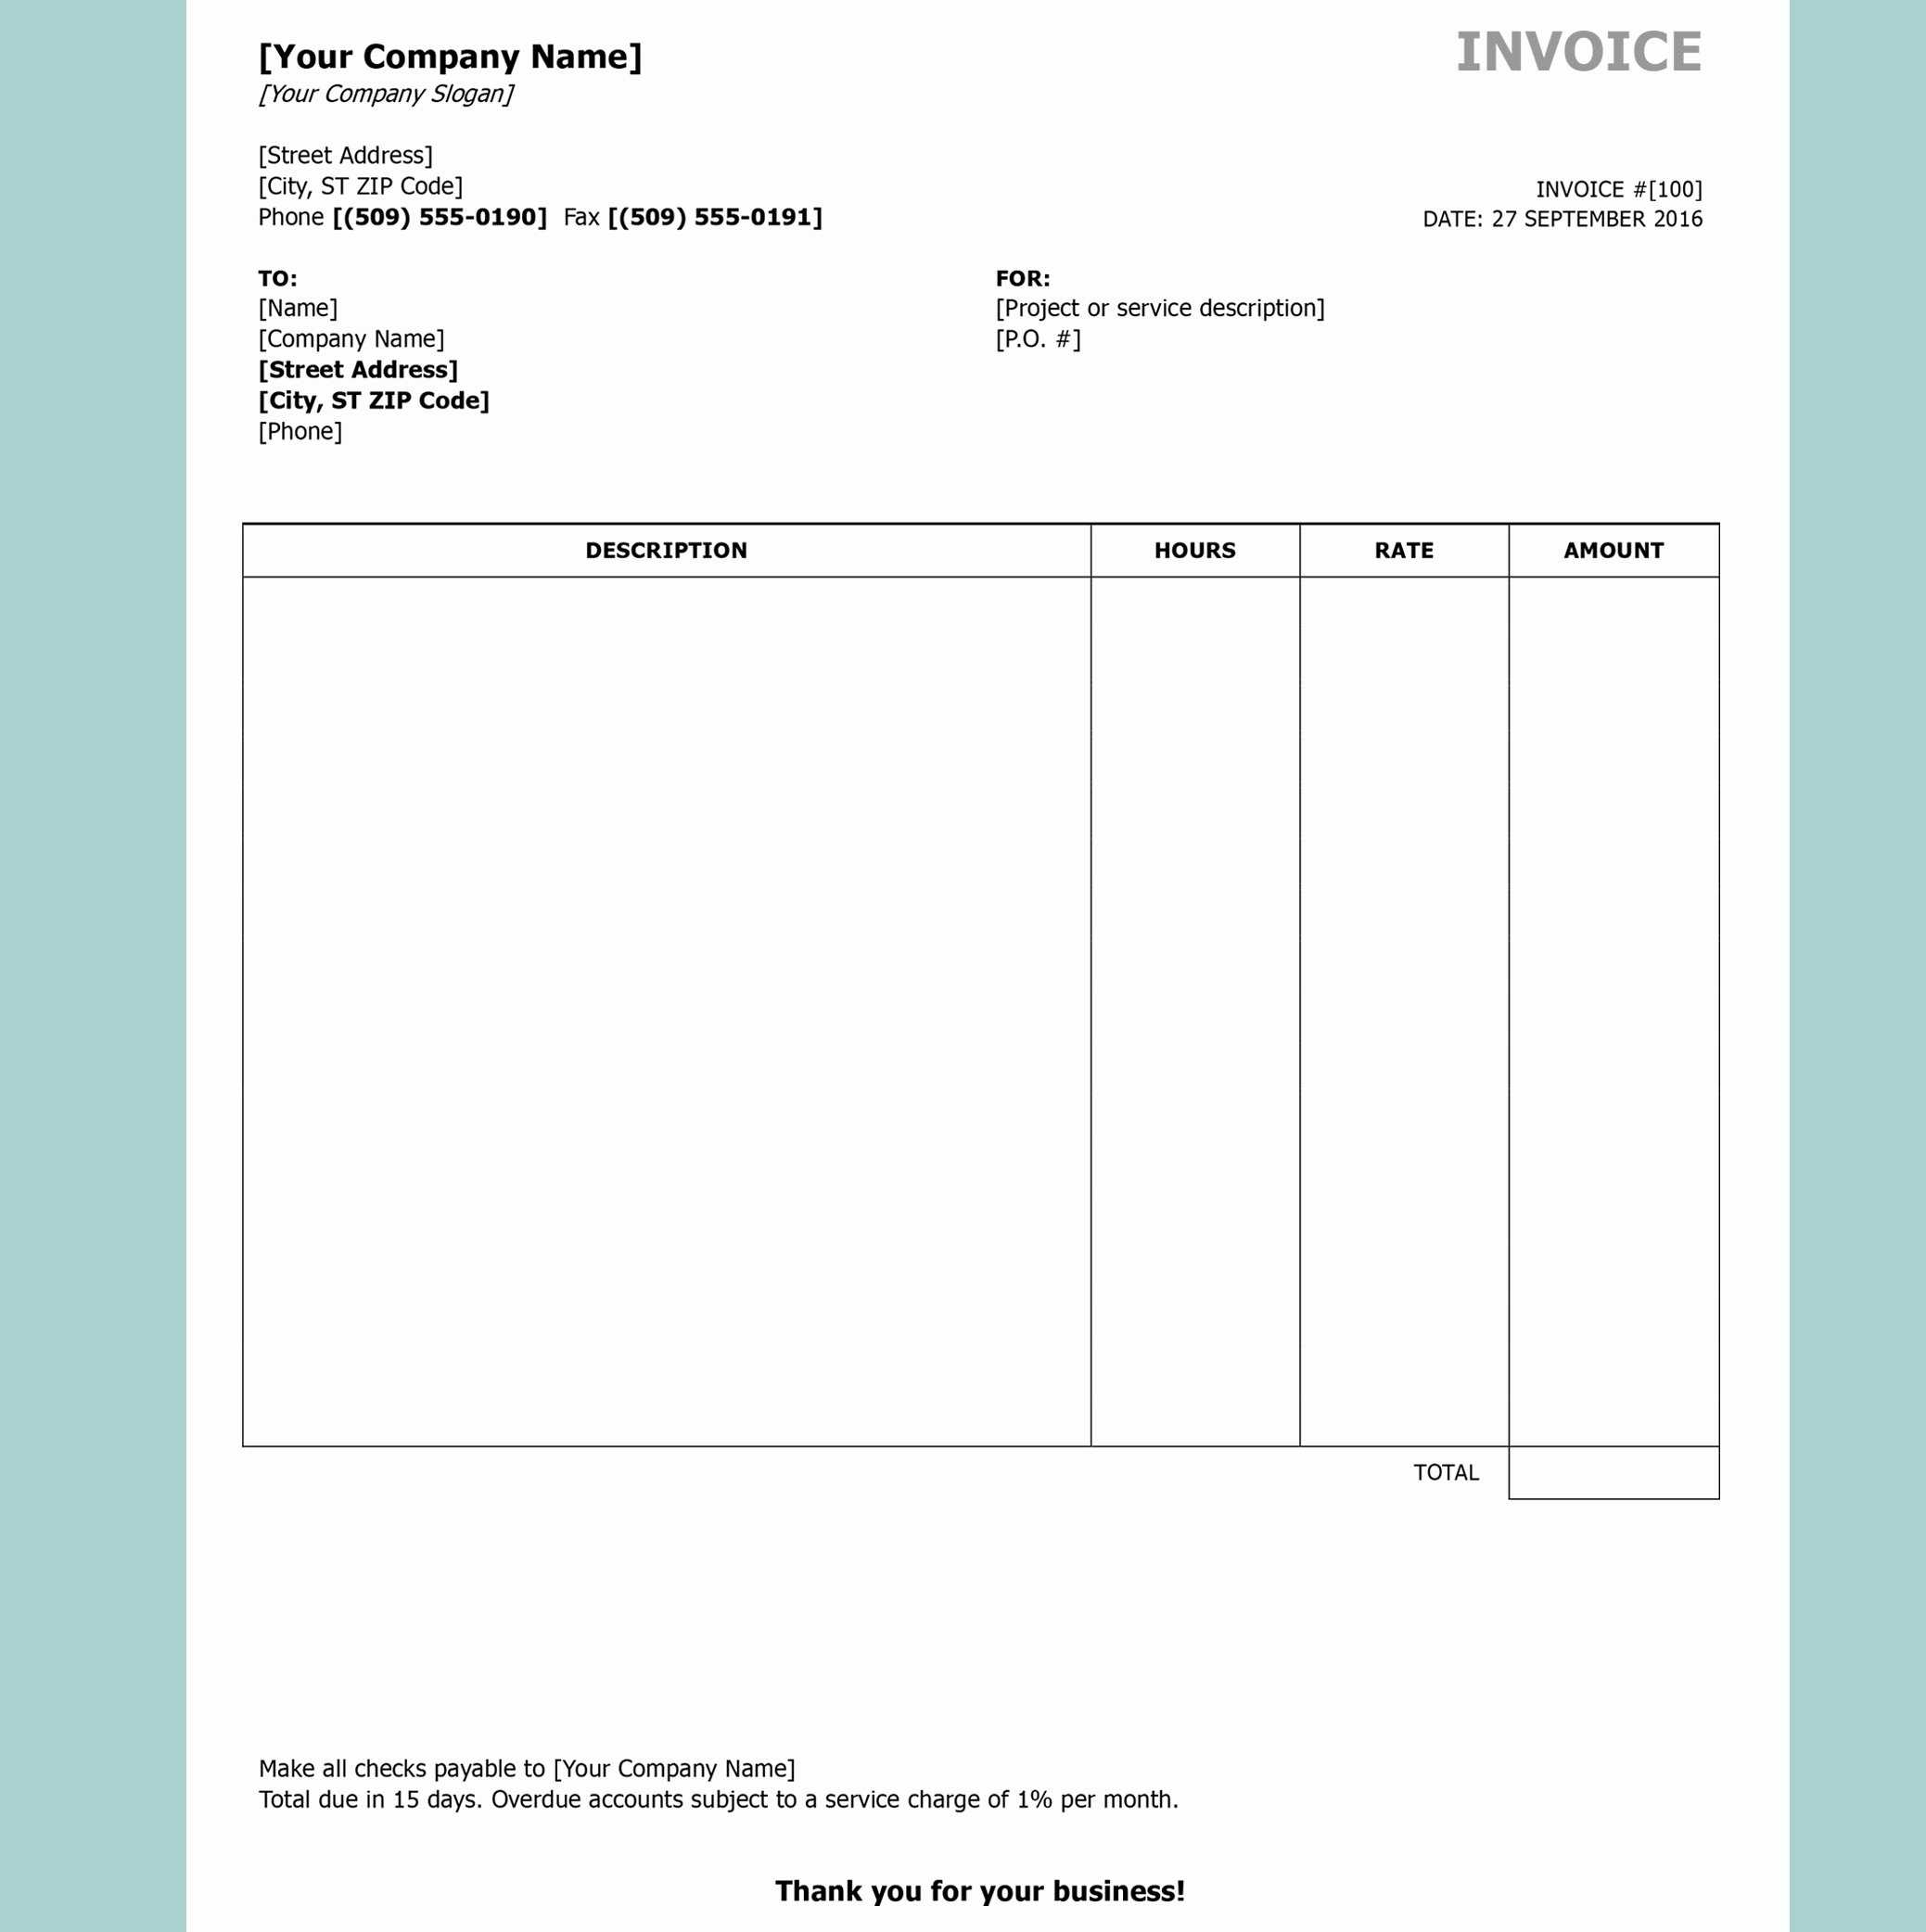 Free Simple Invoice Template For Word - Calep.midnightpig.co Inside Free Downloadable Invoice Template For Word